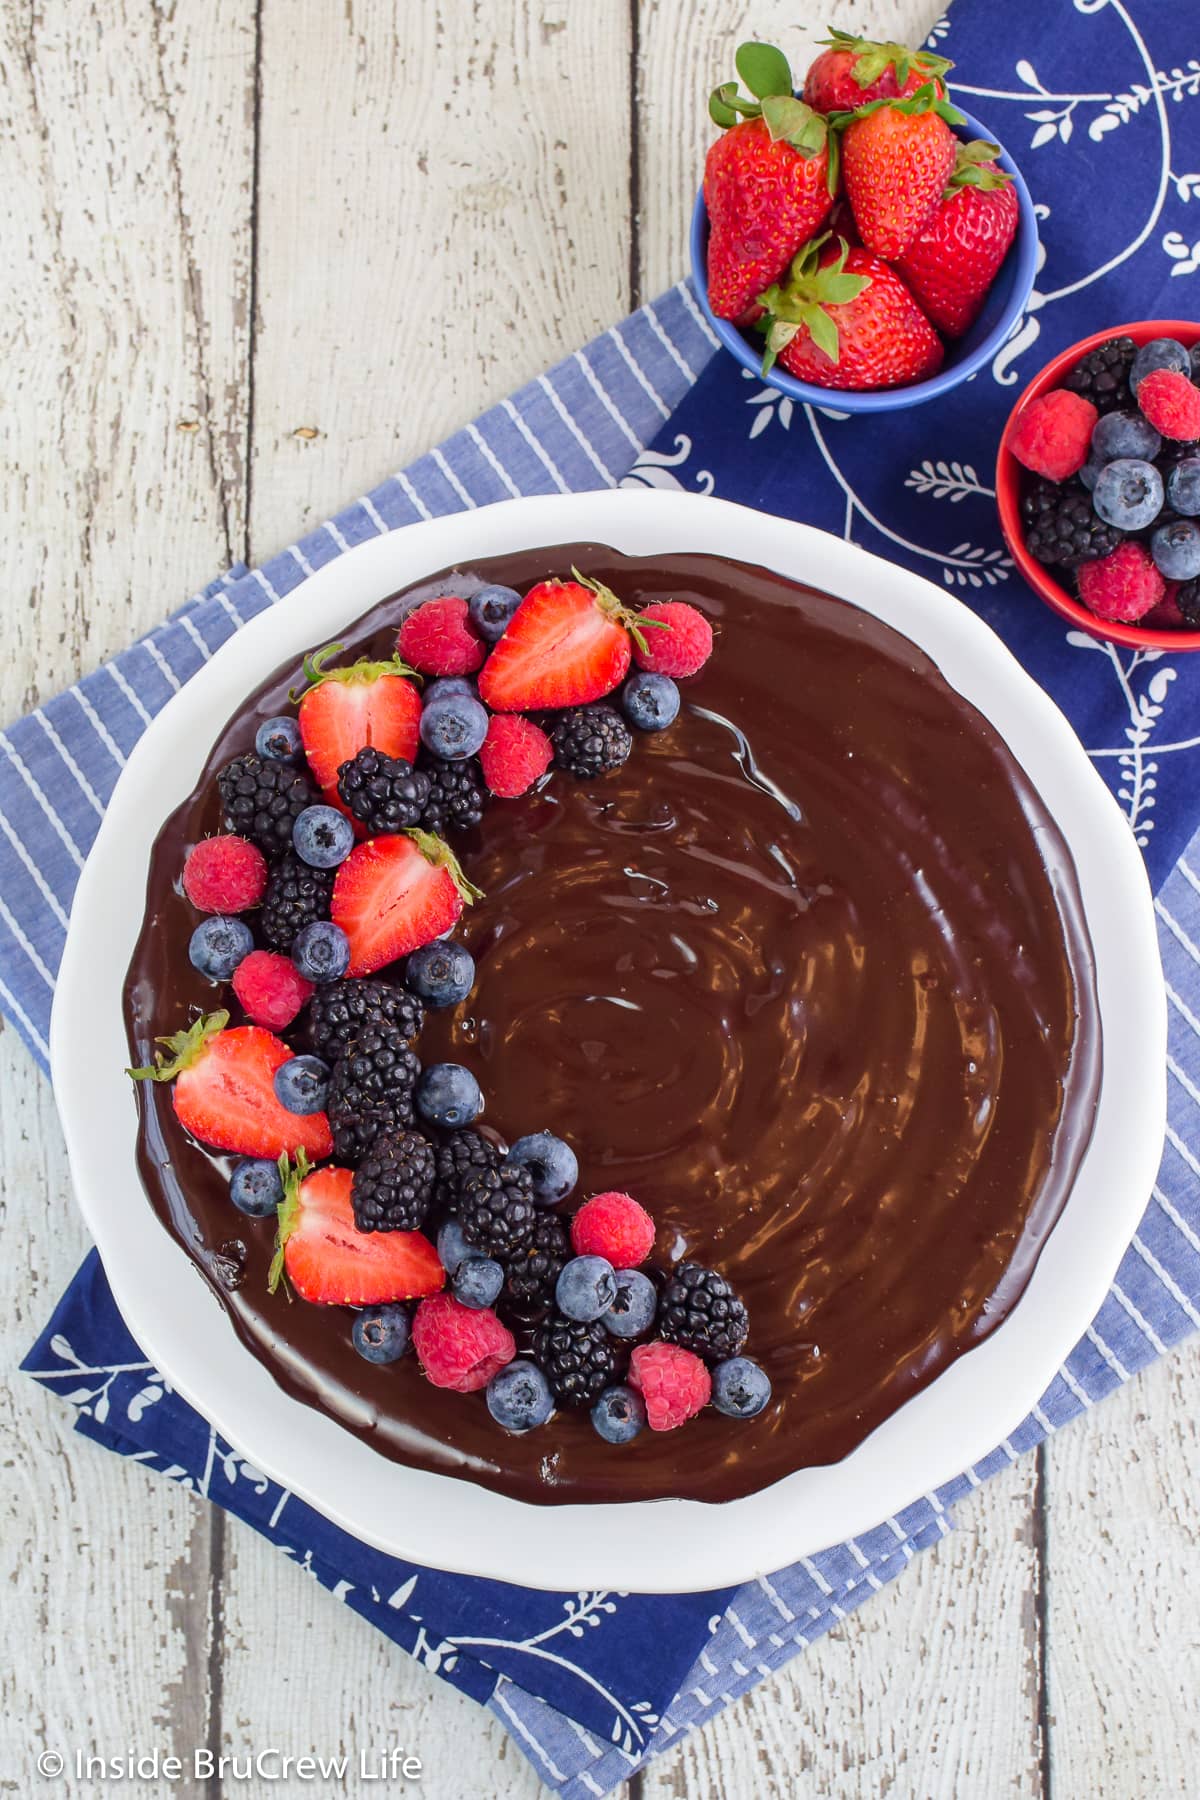 A chocolate cake decorated with fresh berries on a white plate.